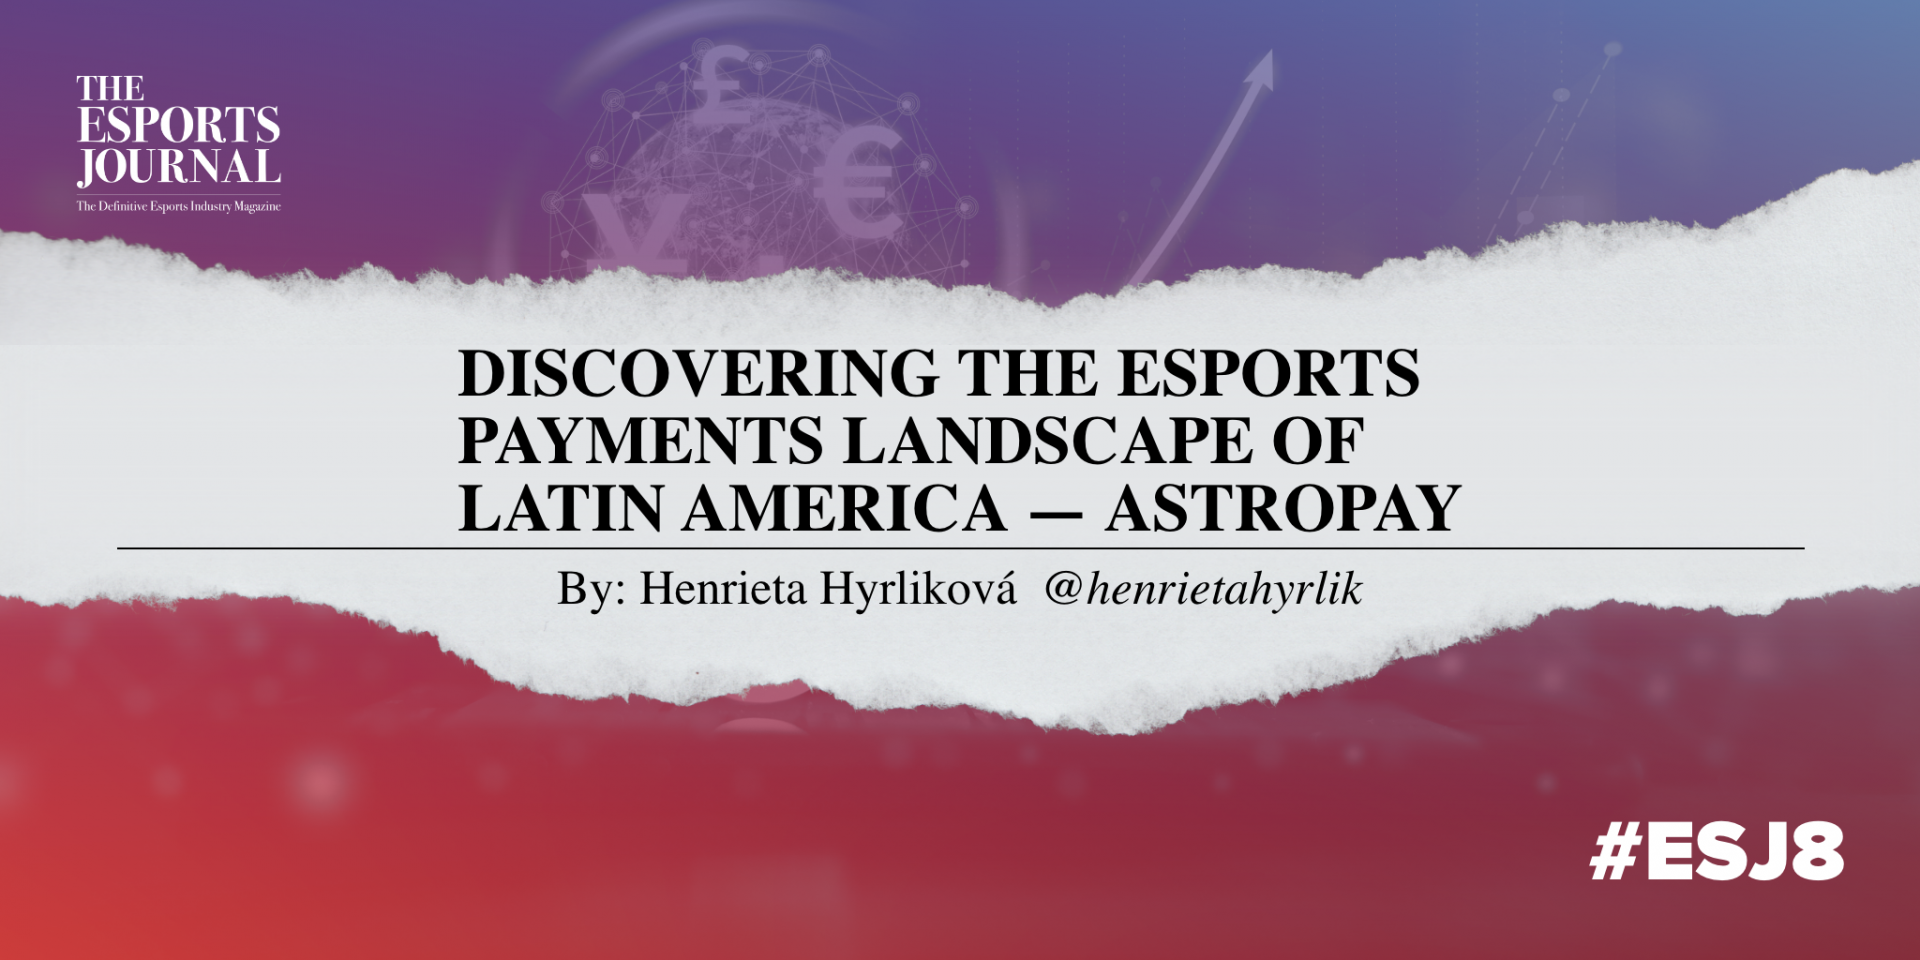 AstroPay The Esports Journal Edition 8